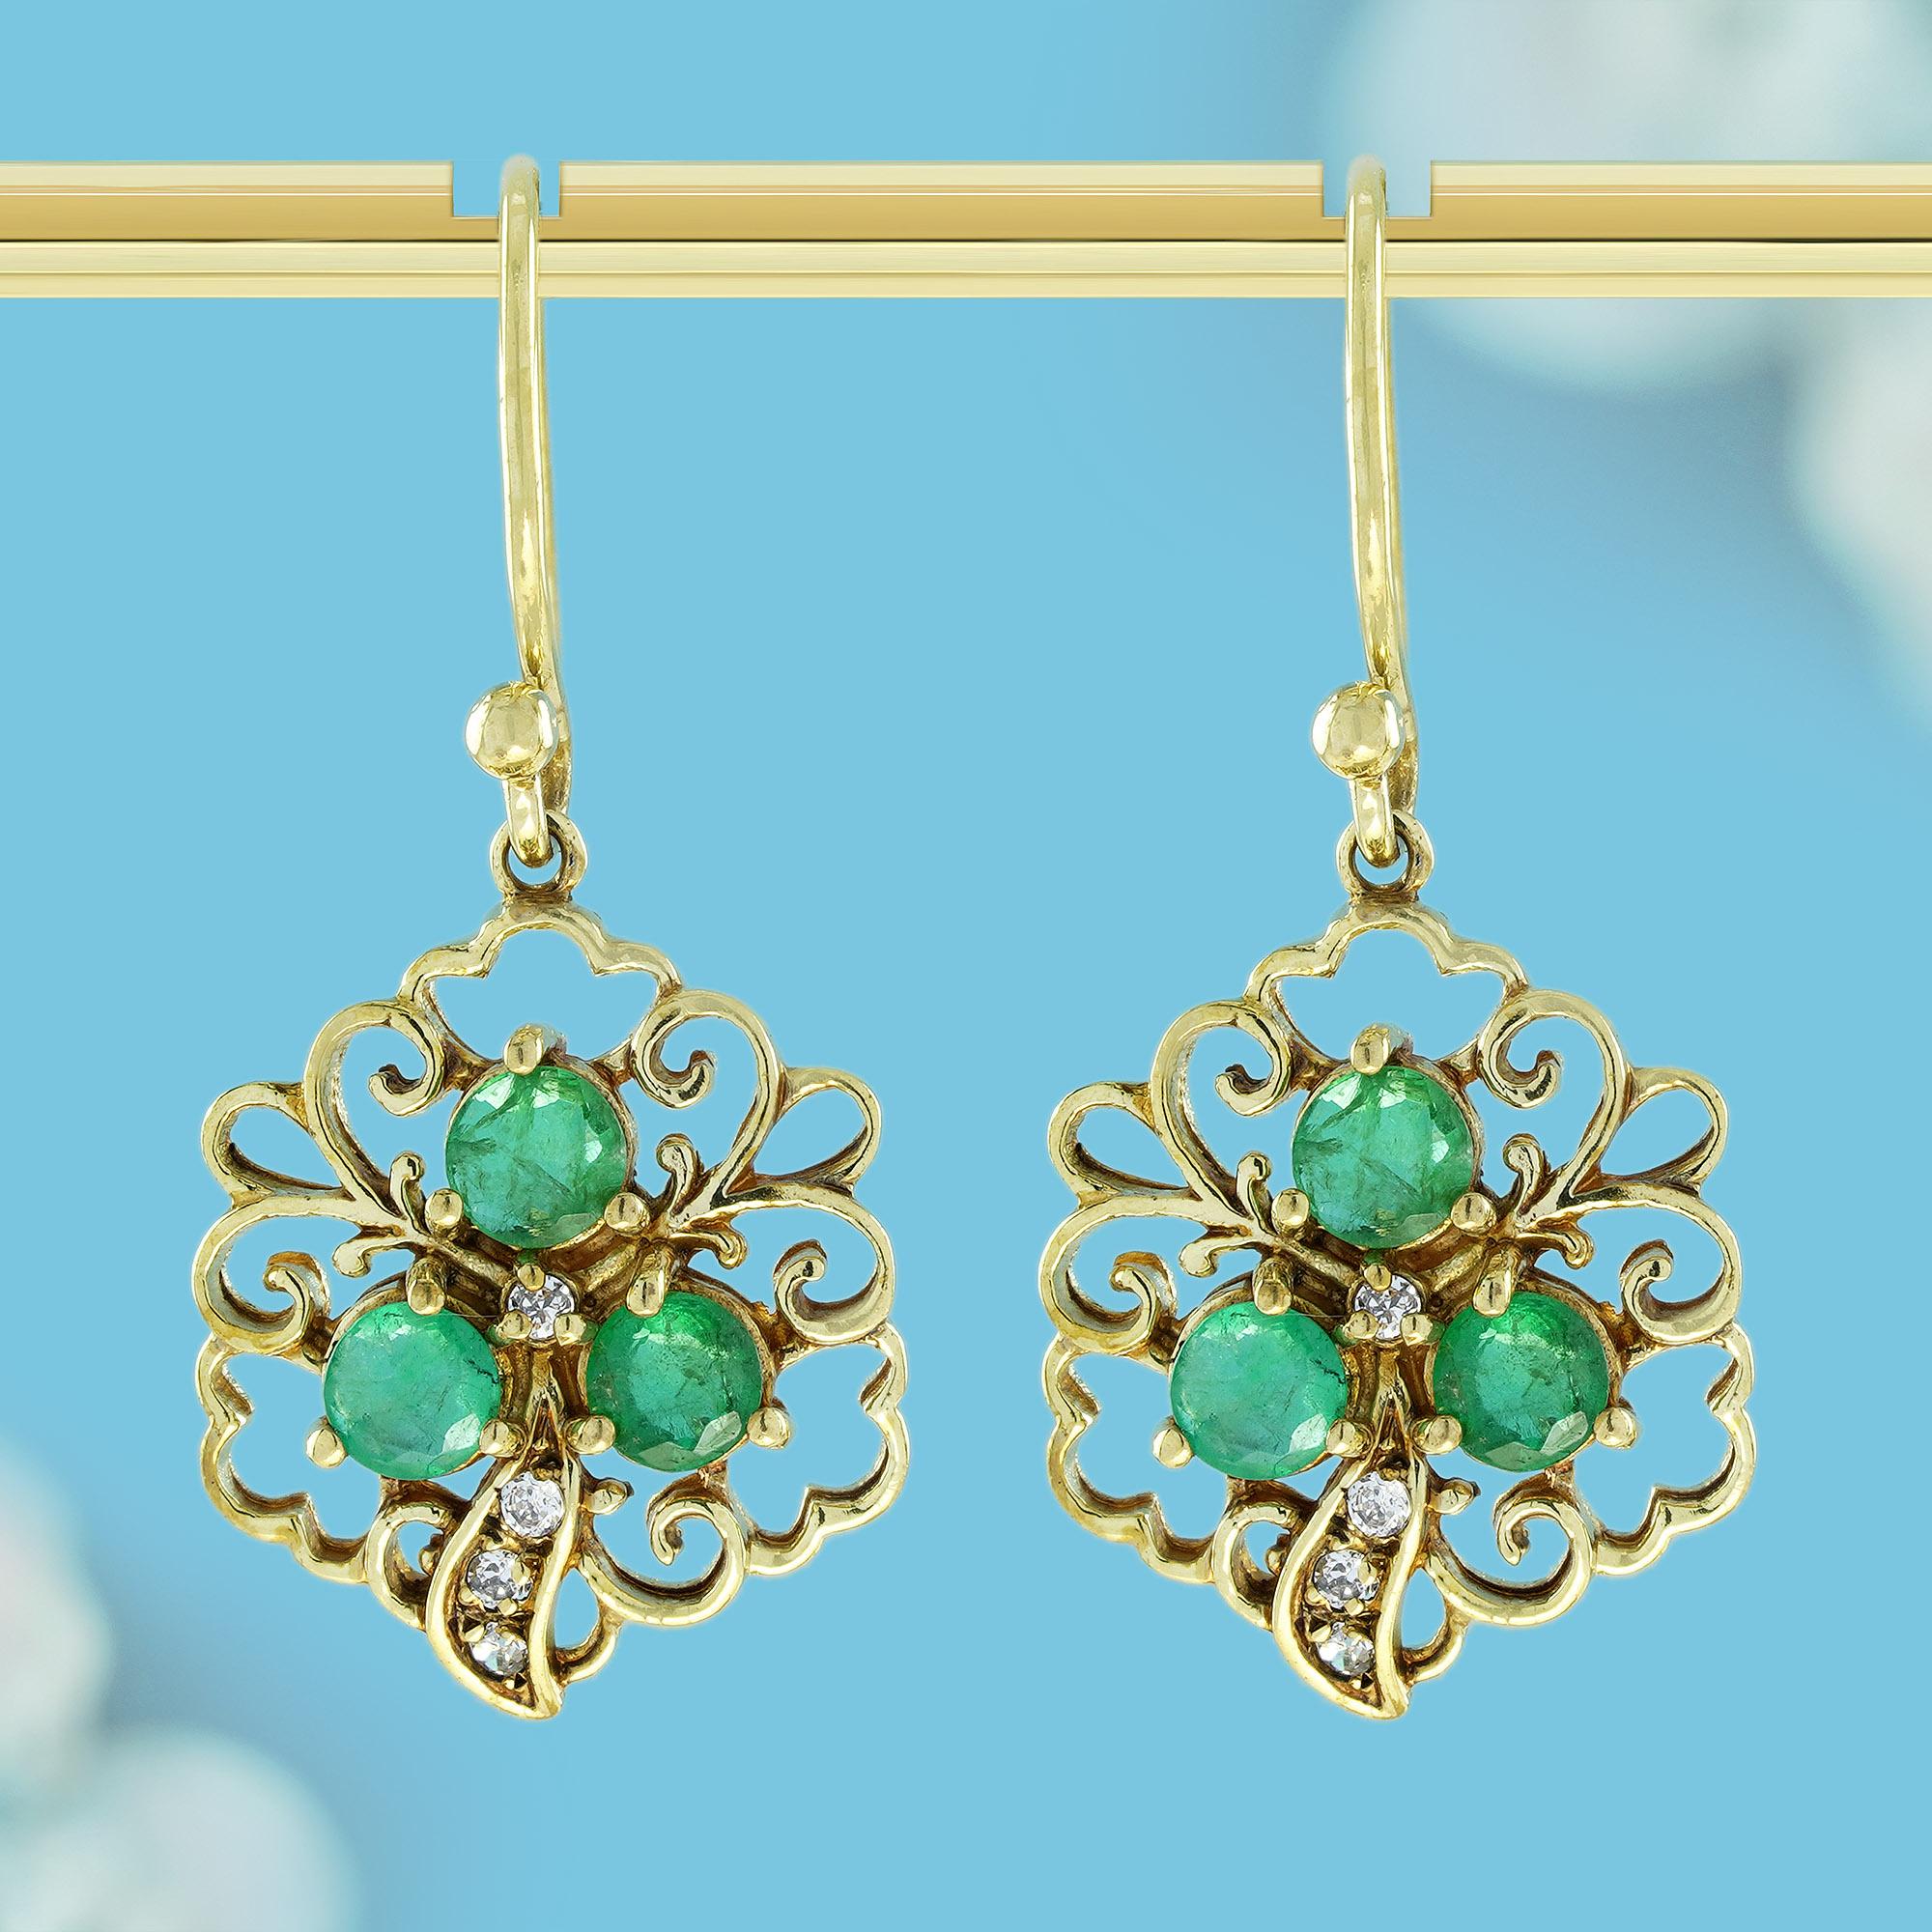 Dive into the luxurious world of Vintage Style with these stunning earrings, boasting intricate floral and nature-inspired motifs. Each earring features a mesmerizing cluster design, where lustrous green emeralds delicately form intricate flower